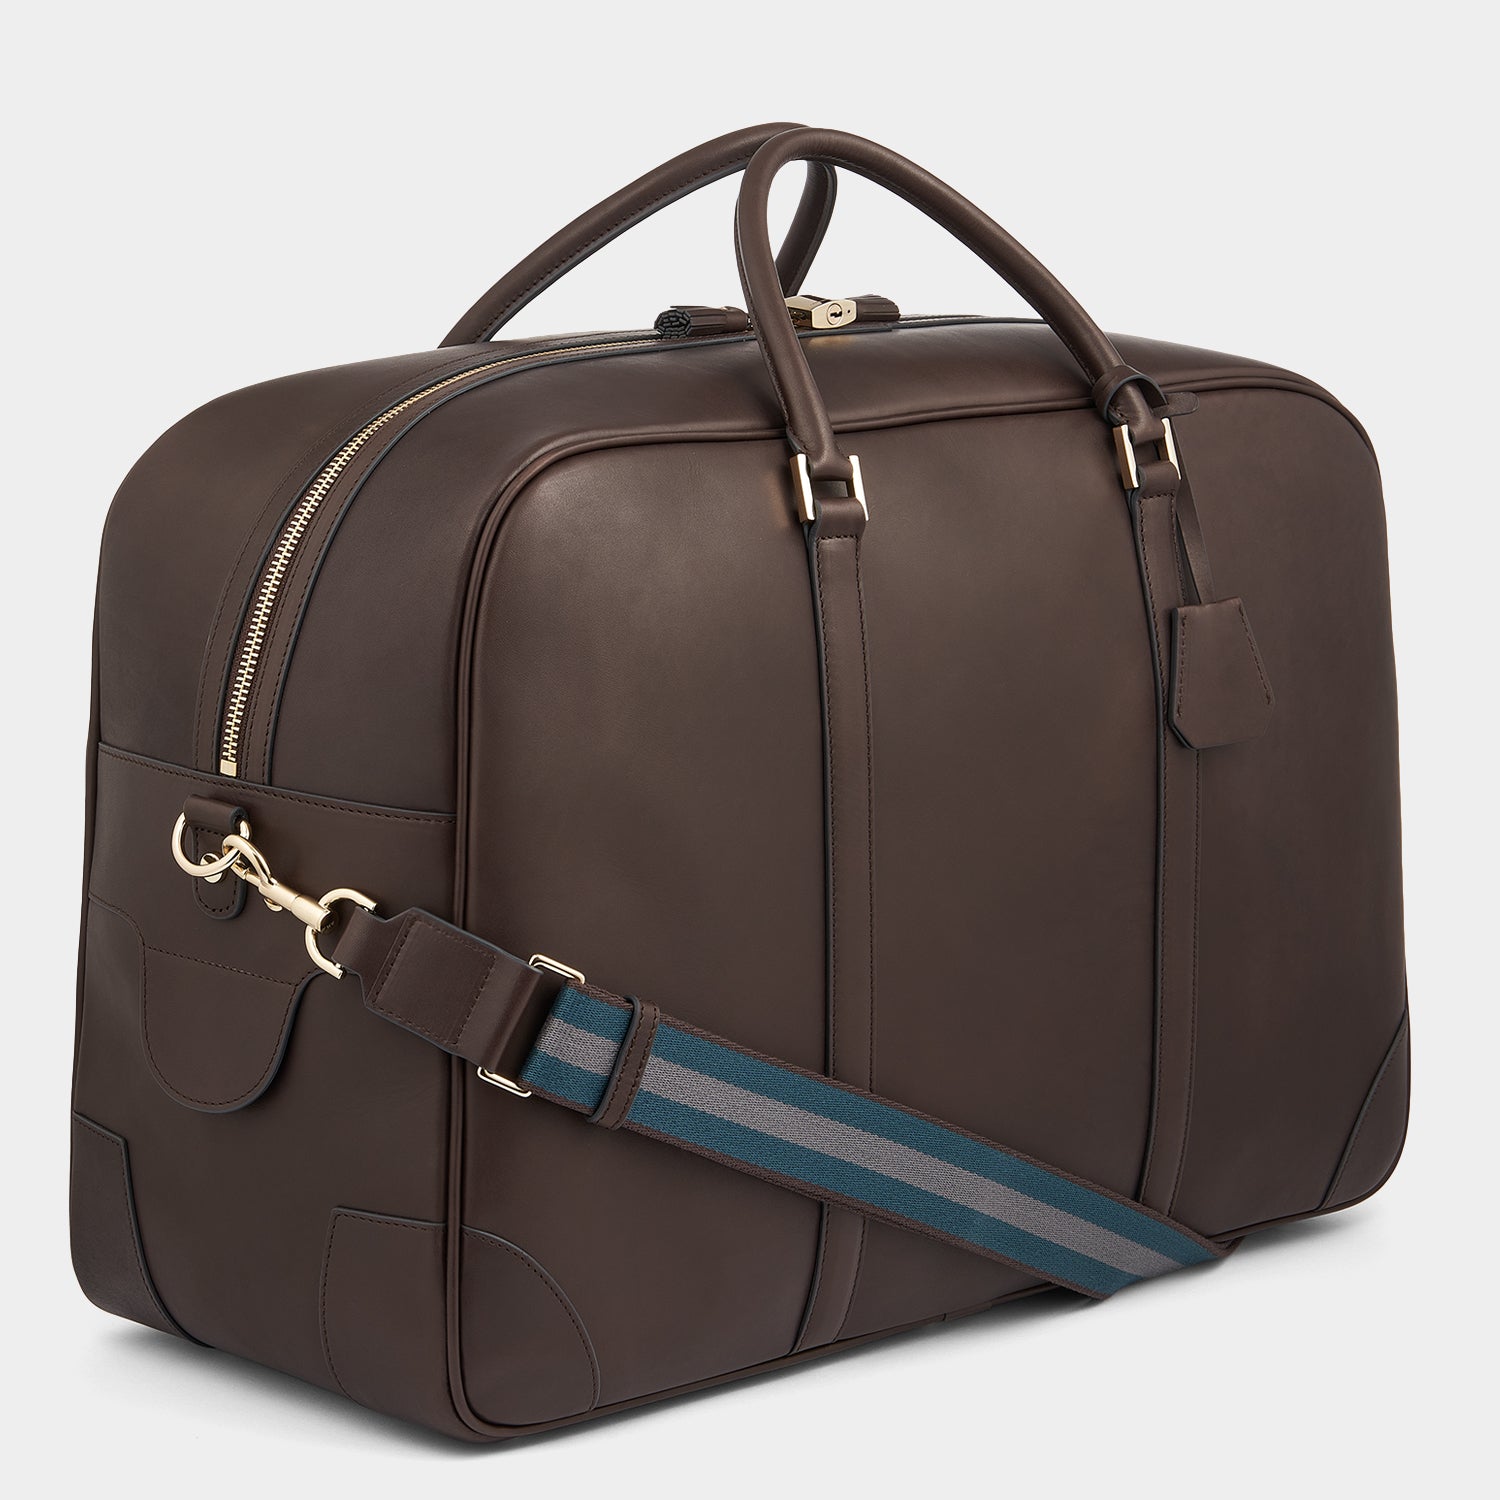 Bespoke Weekend Latimer -

                  
                    Butter Leather in Chocolate -
                  

                  Anya Hindmarch UK
